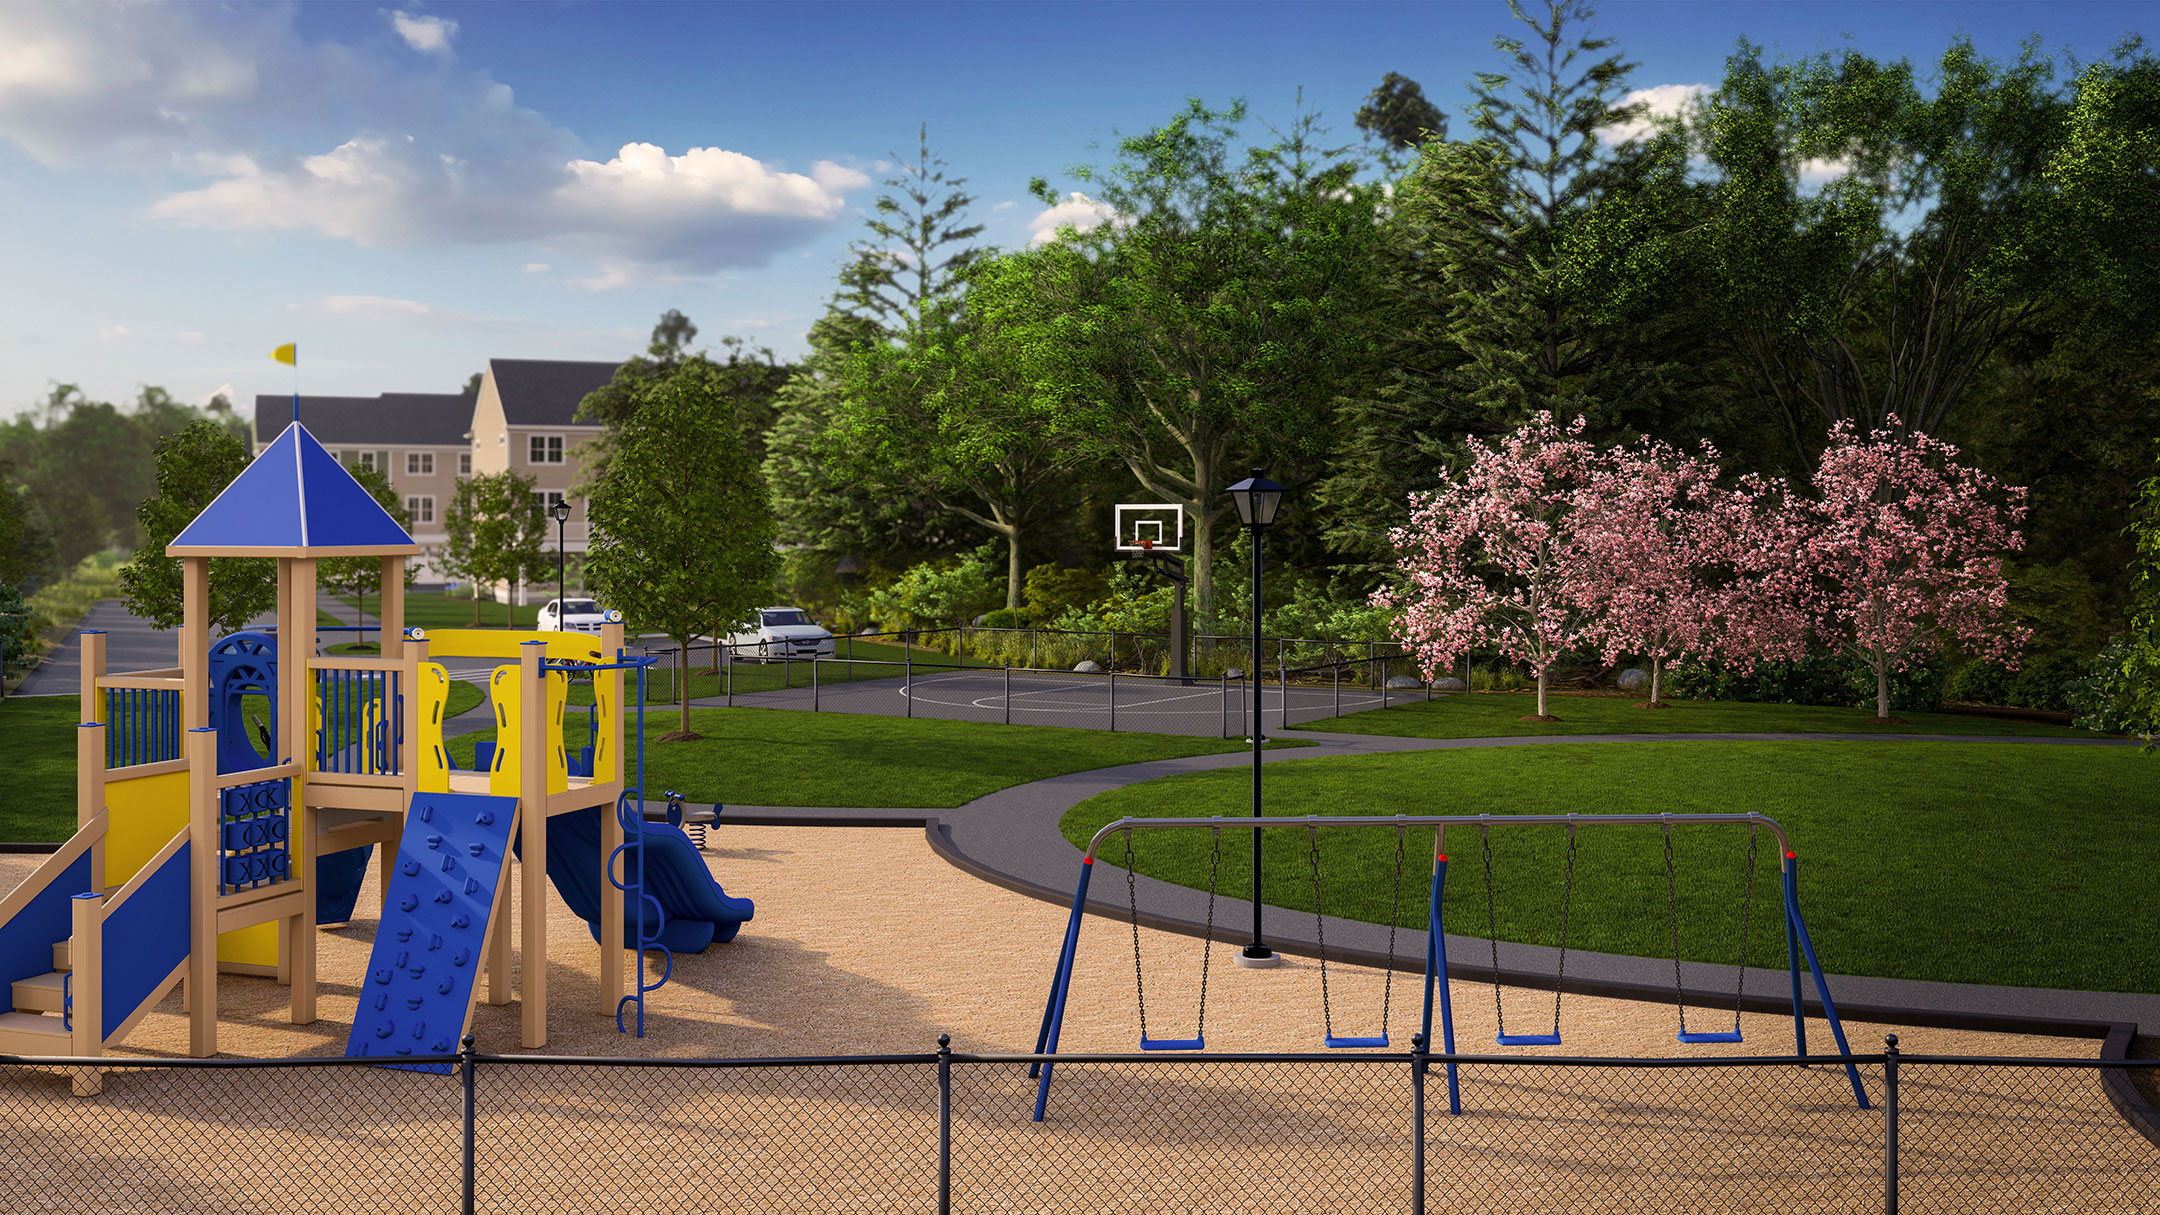 Playground at Larkwood Townhouse Community in South Eastern MA